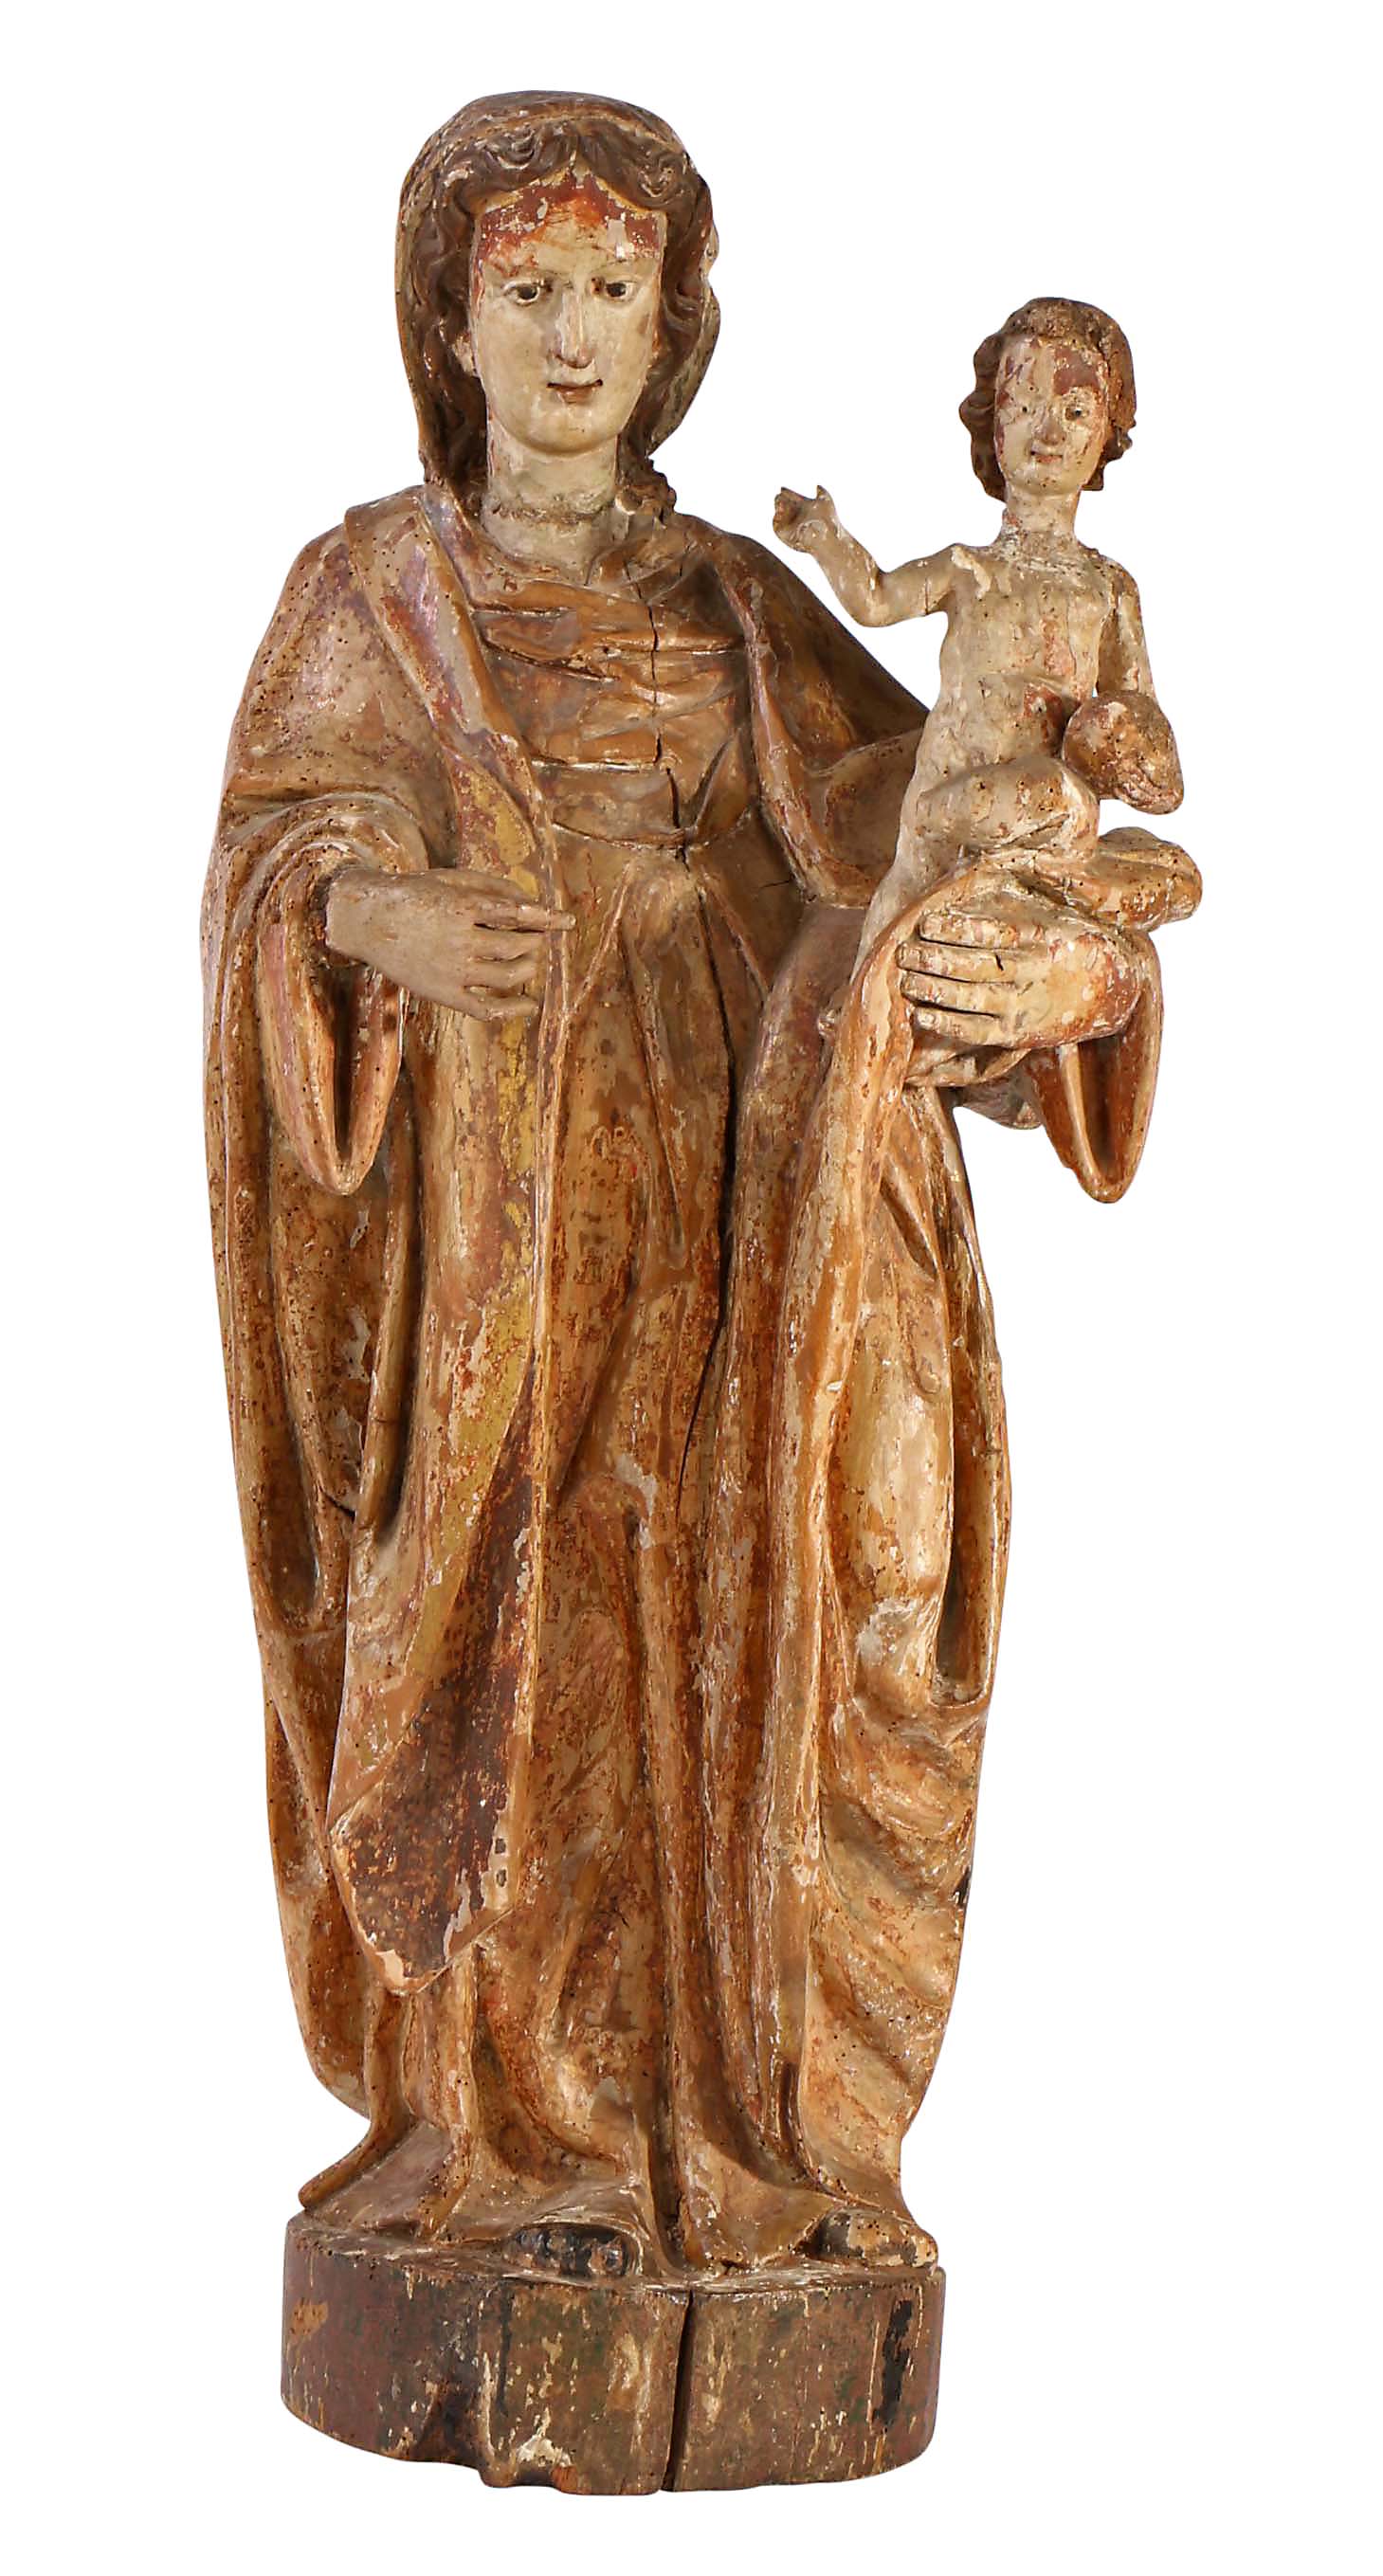 A 16th/17th century polychrome-decorated figural carving, Madonna & Child, European The Virgin - Image 2 of 3